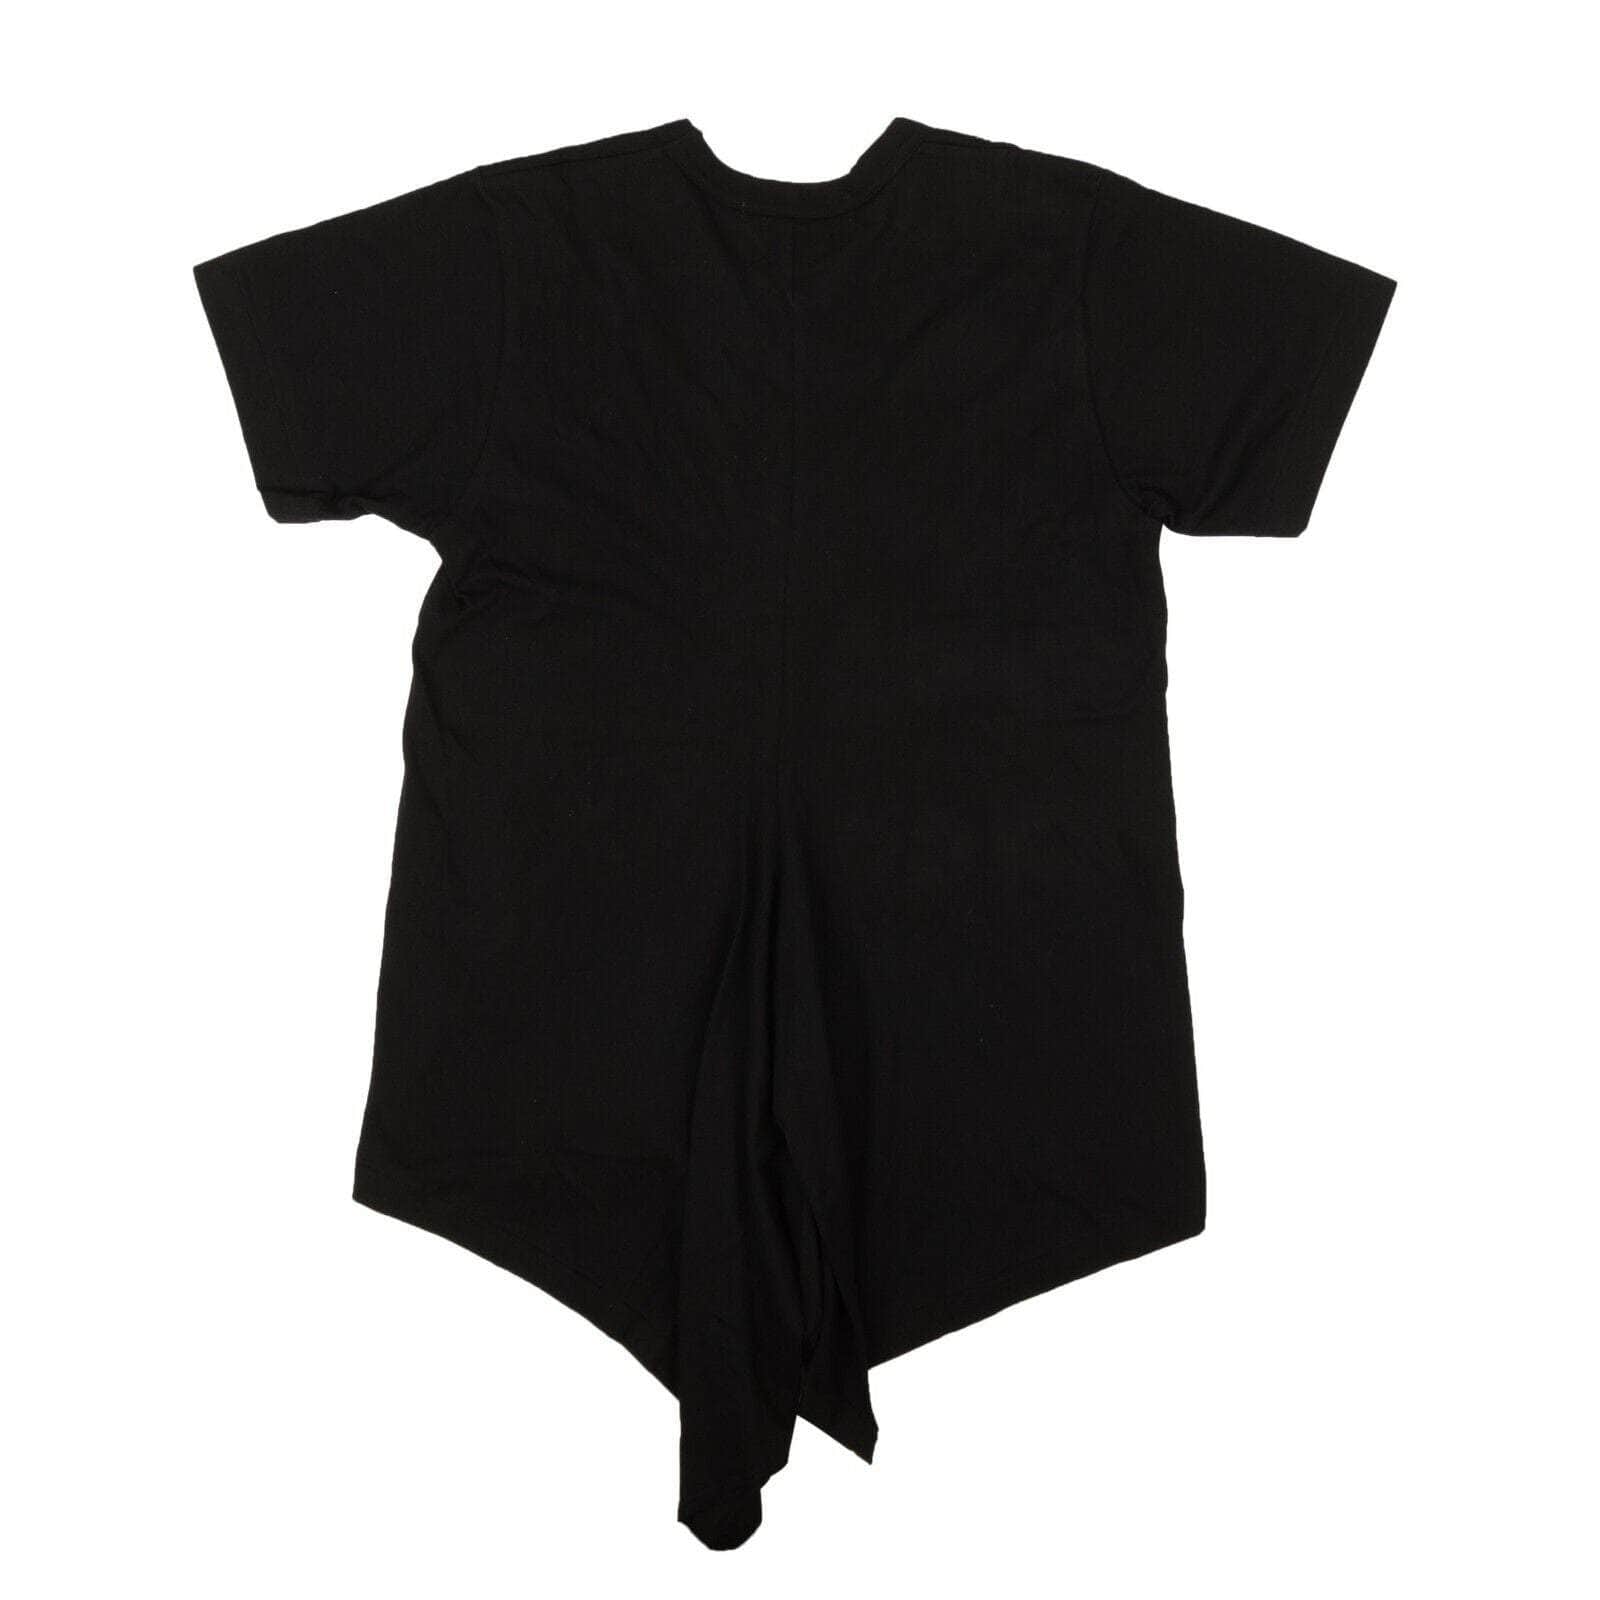 Comme Des Garcons channelenable-all, chicmi, comme-des-garcons, couponcollection, gender-womens, main-clothing, size-s, under-250 S Black Back Cut Short Sleeve T-Shirt 95-CDG-1023/S 95-CDG-1023/S